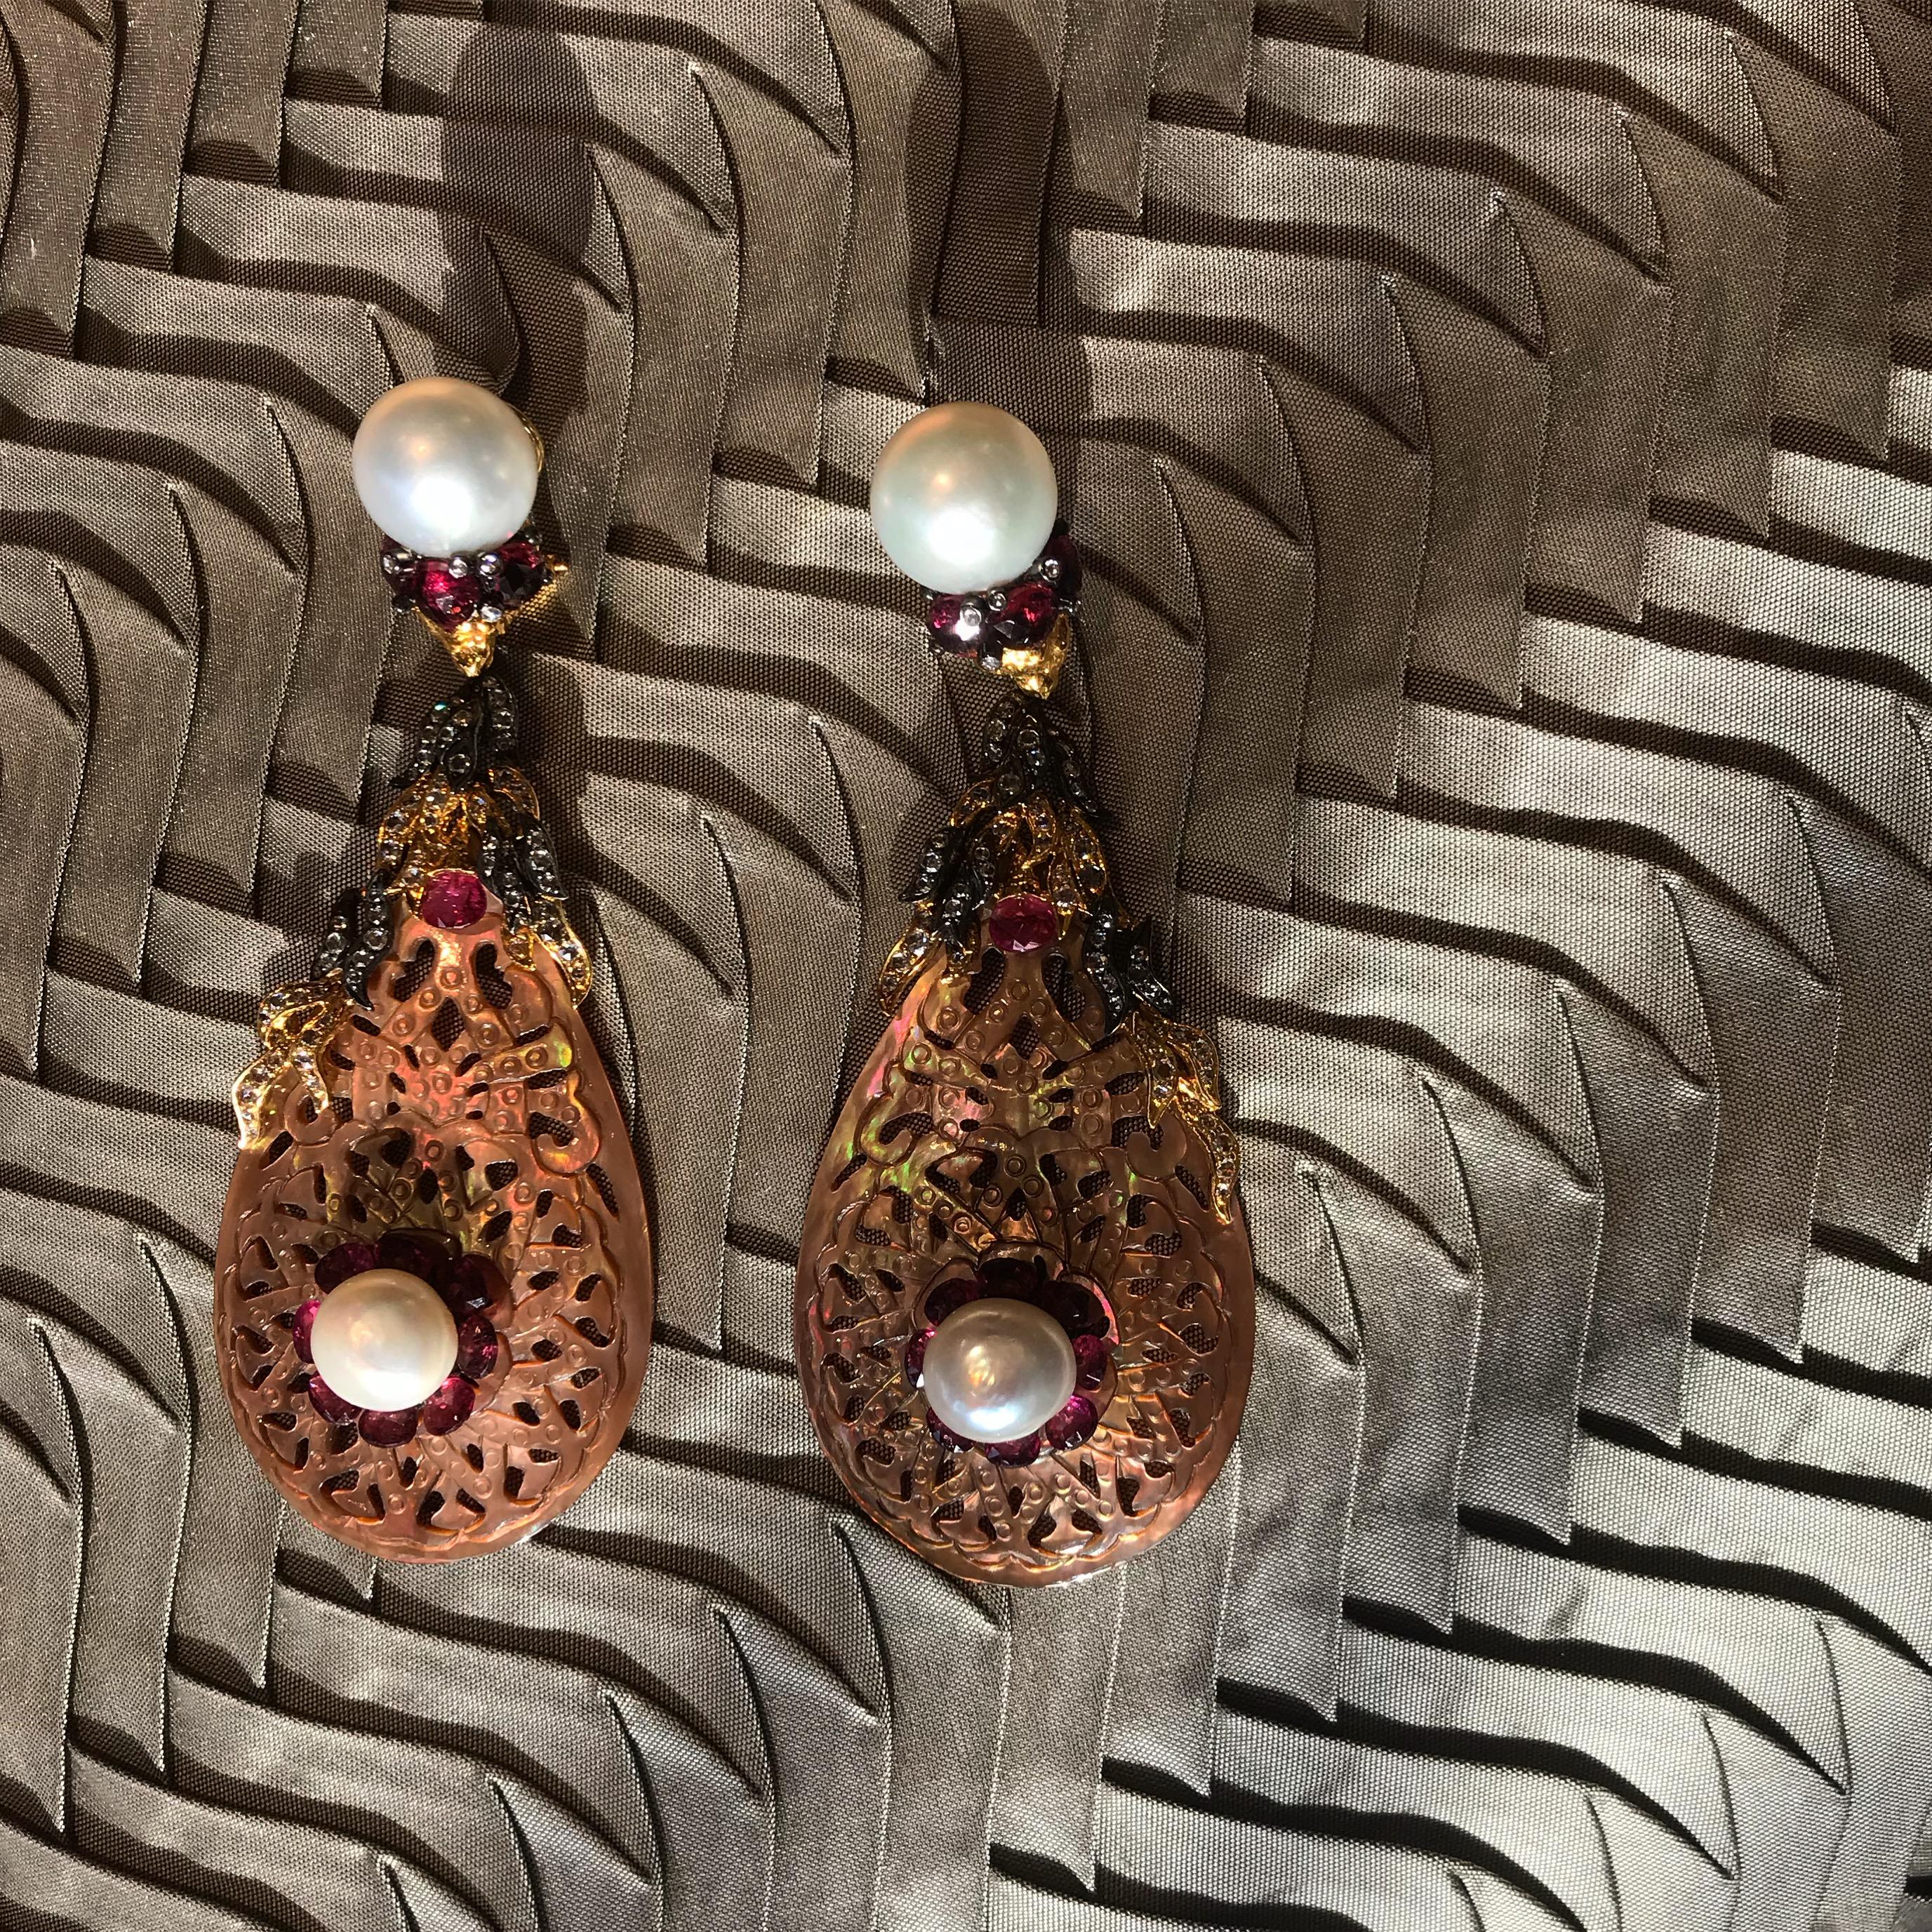 Exotic colors emanate from the mother-of-pearl nacre. These sea reef and rock creatures build the shells as they grow, with rings of colors gray, brown, blue, green, pink and gold.
These earrings have assortment of handcrafted jewelry incorporating